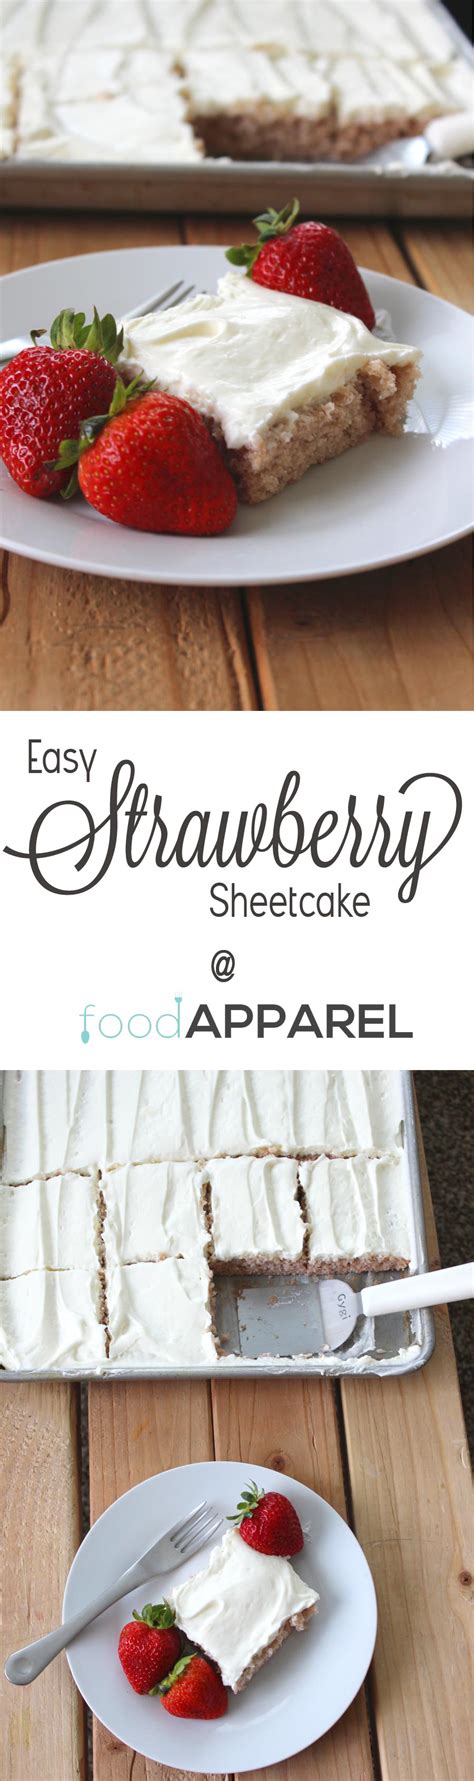 Easy Strawberry Sheetcake With Whipped Frosting Recipe